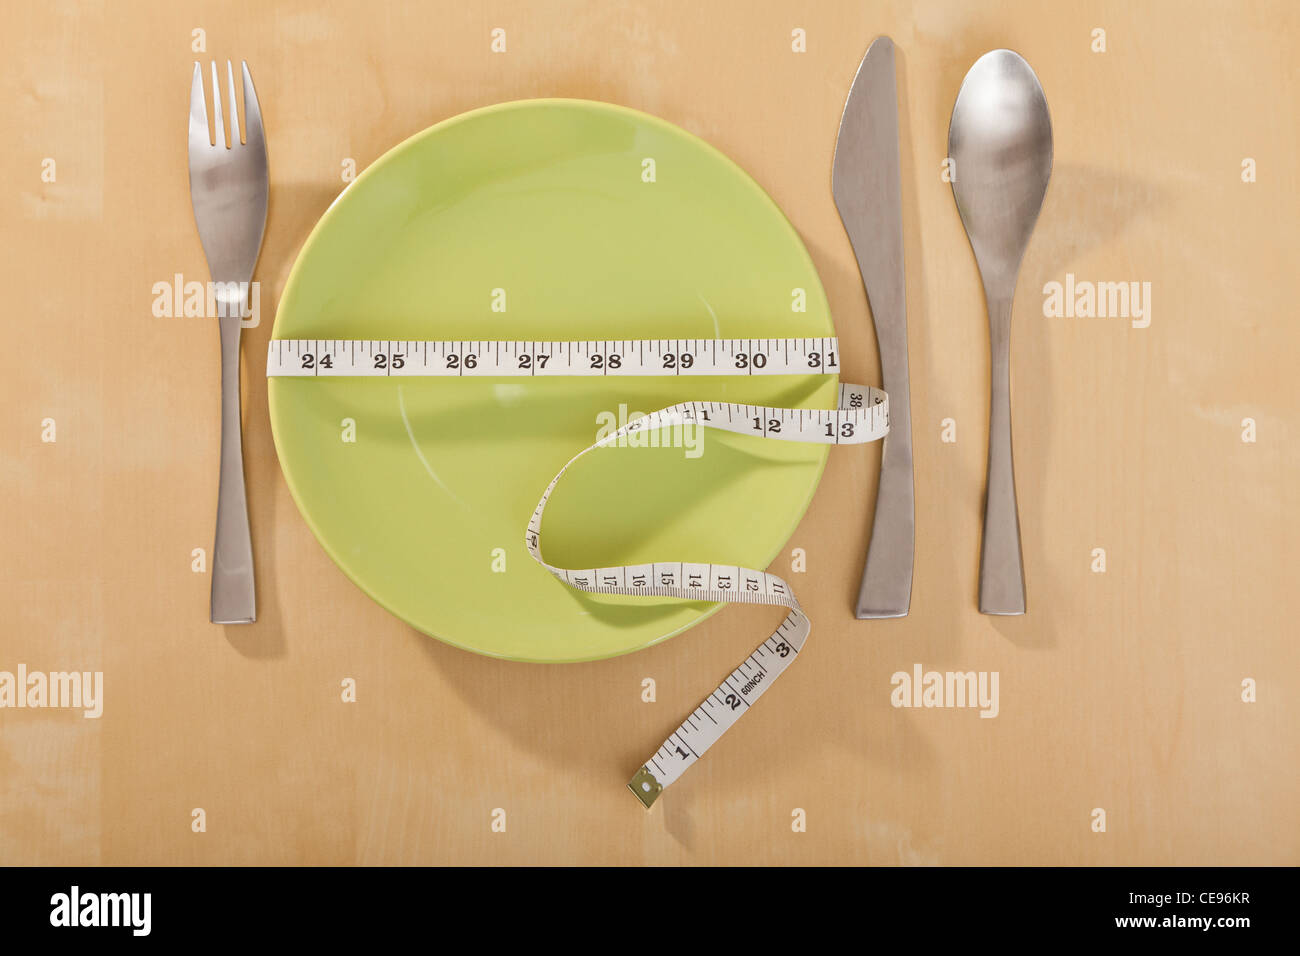 Plate wrapped in tape measure Stock Photo